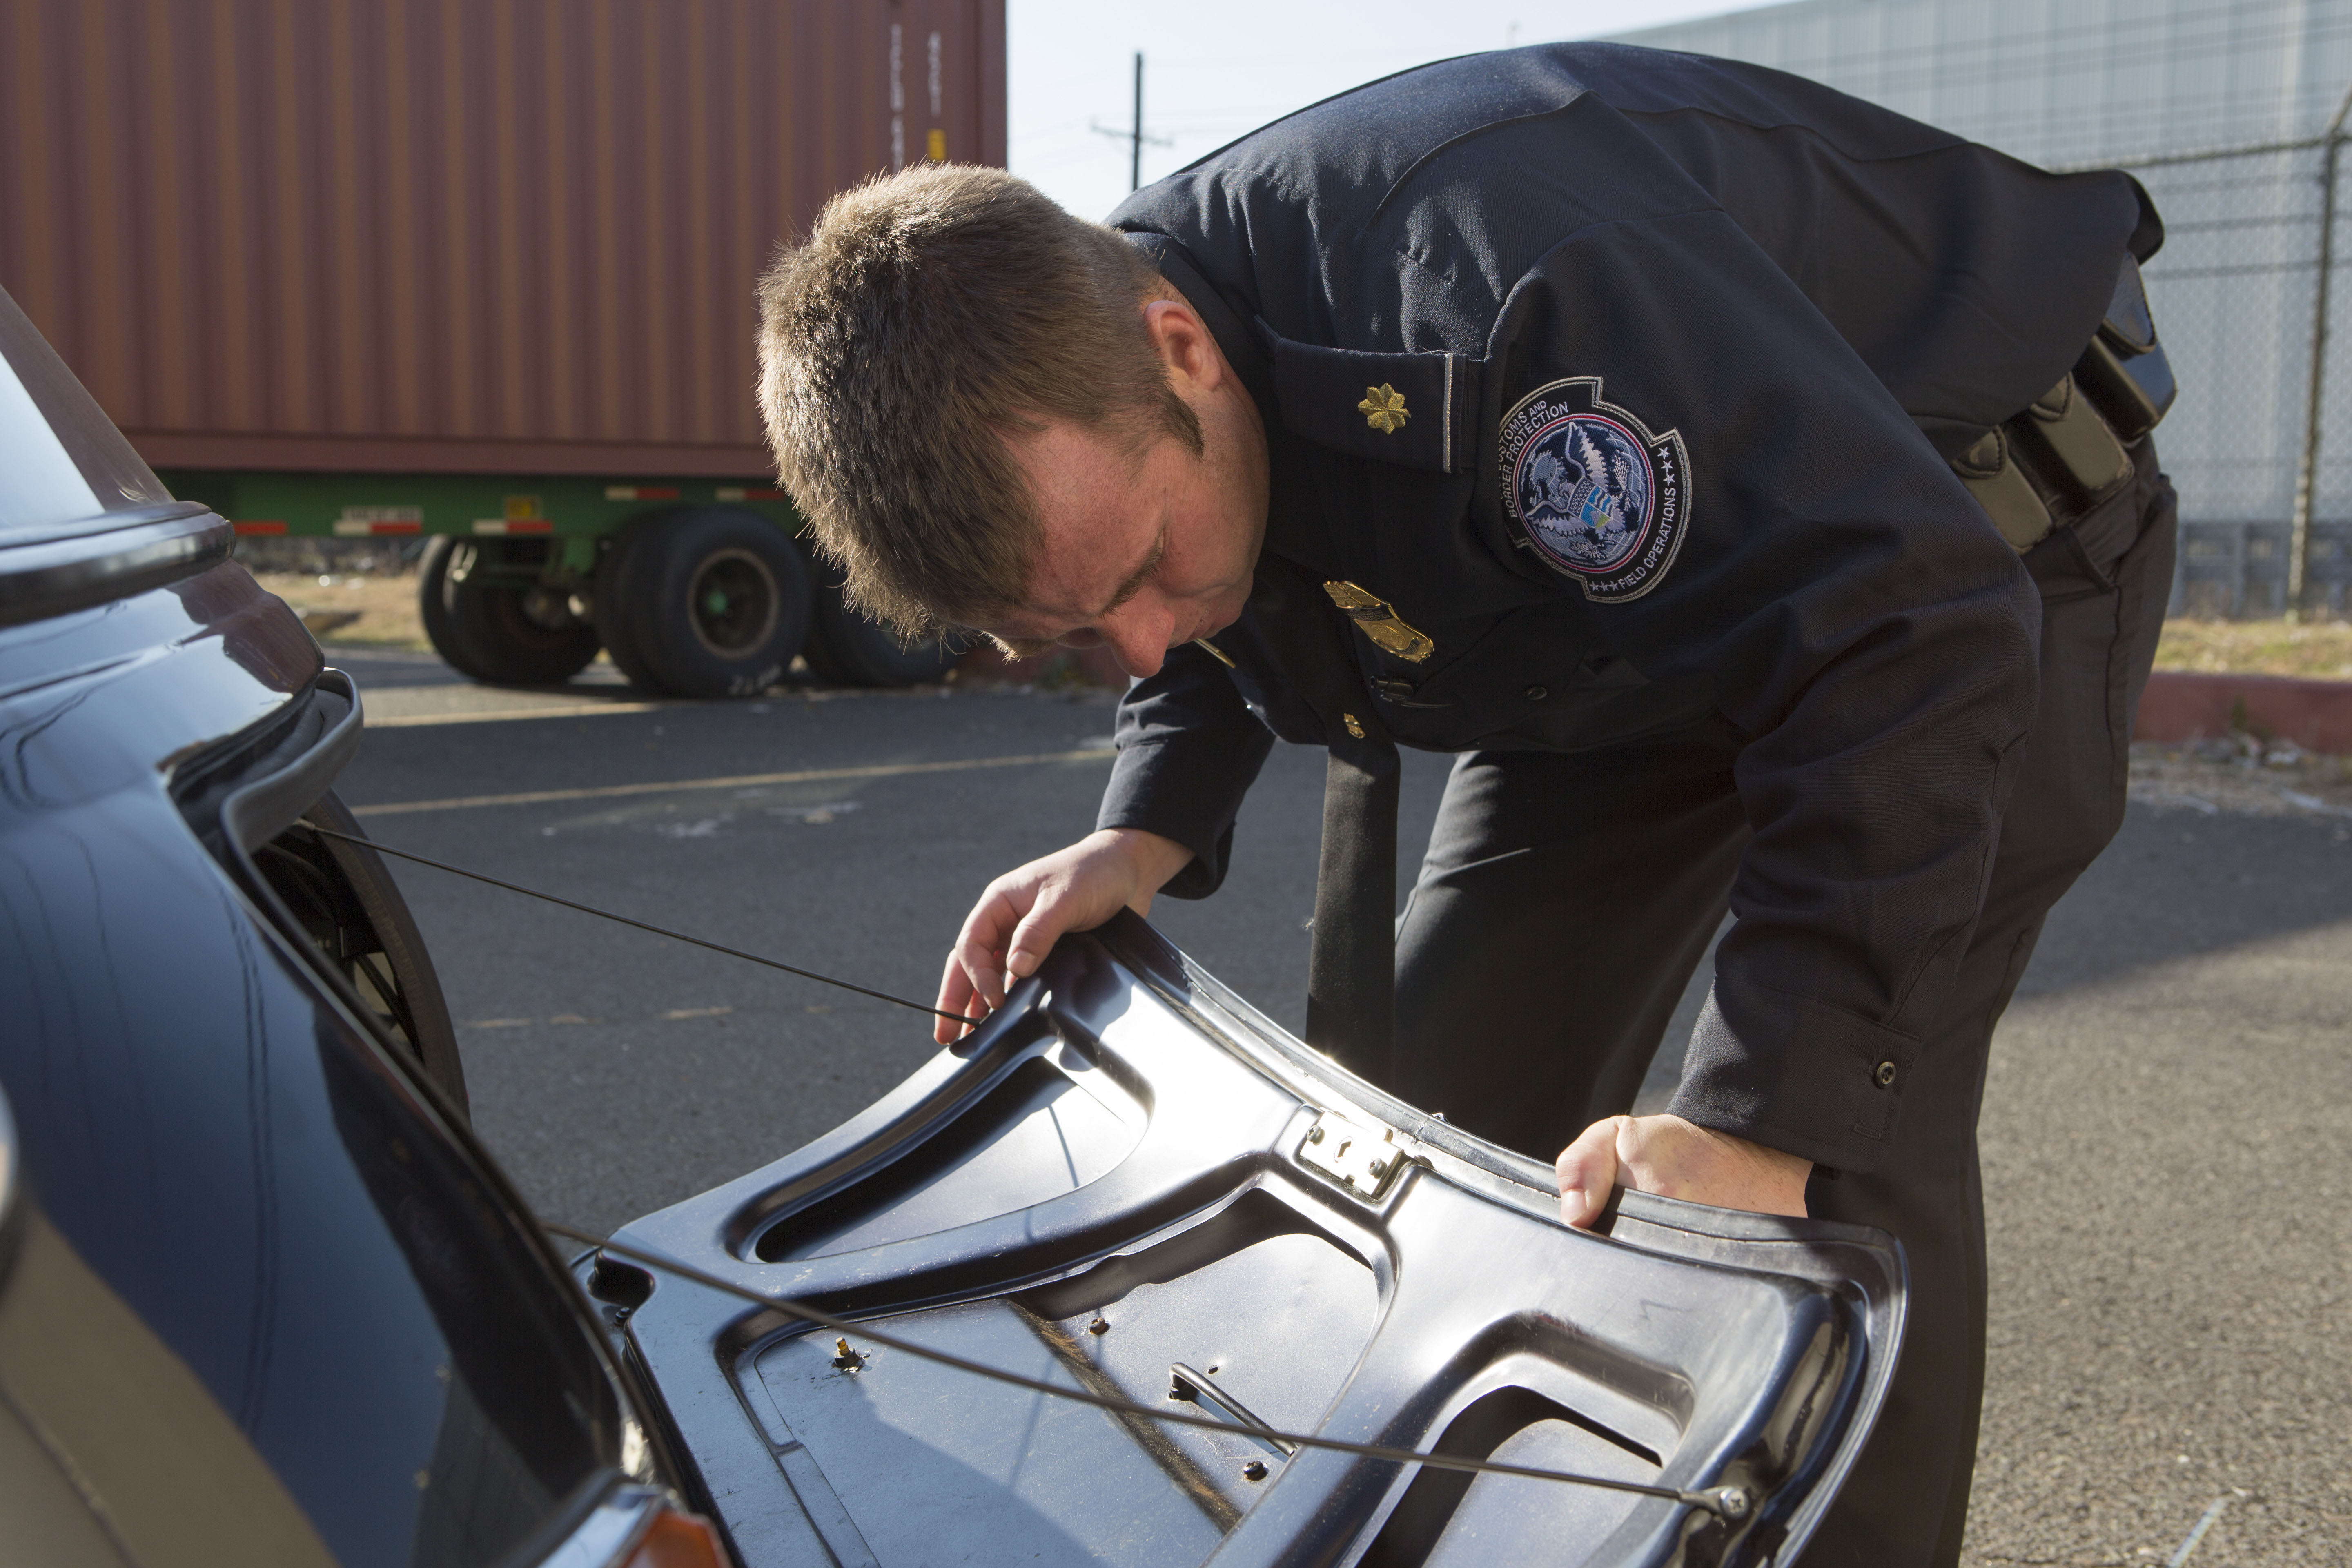 A Customs and Border Protection Officer inspects a Mini Cooper that arrived to Port Elizabeth NJ that had numerous violations associated with it related to importation. This vehicle will be destroyed as a result. Photo Credit: James Tourtellotte